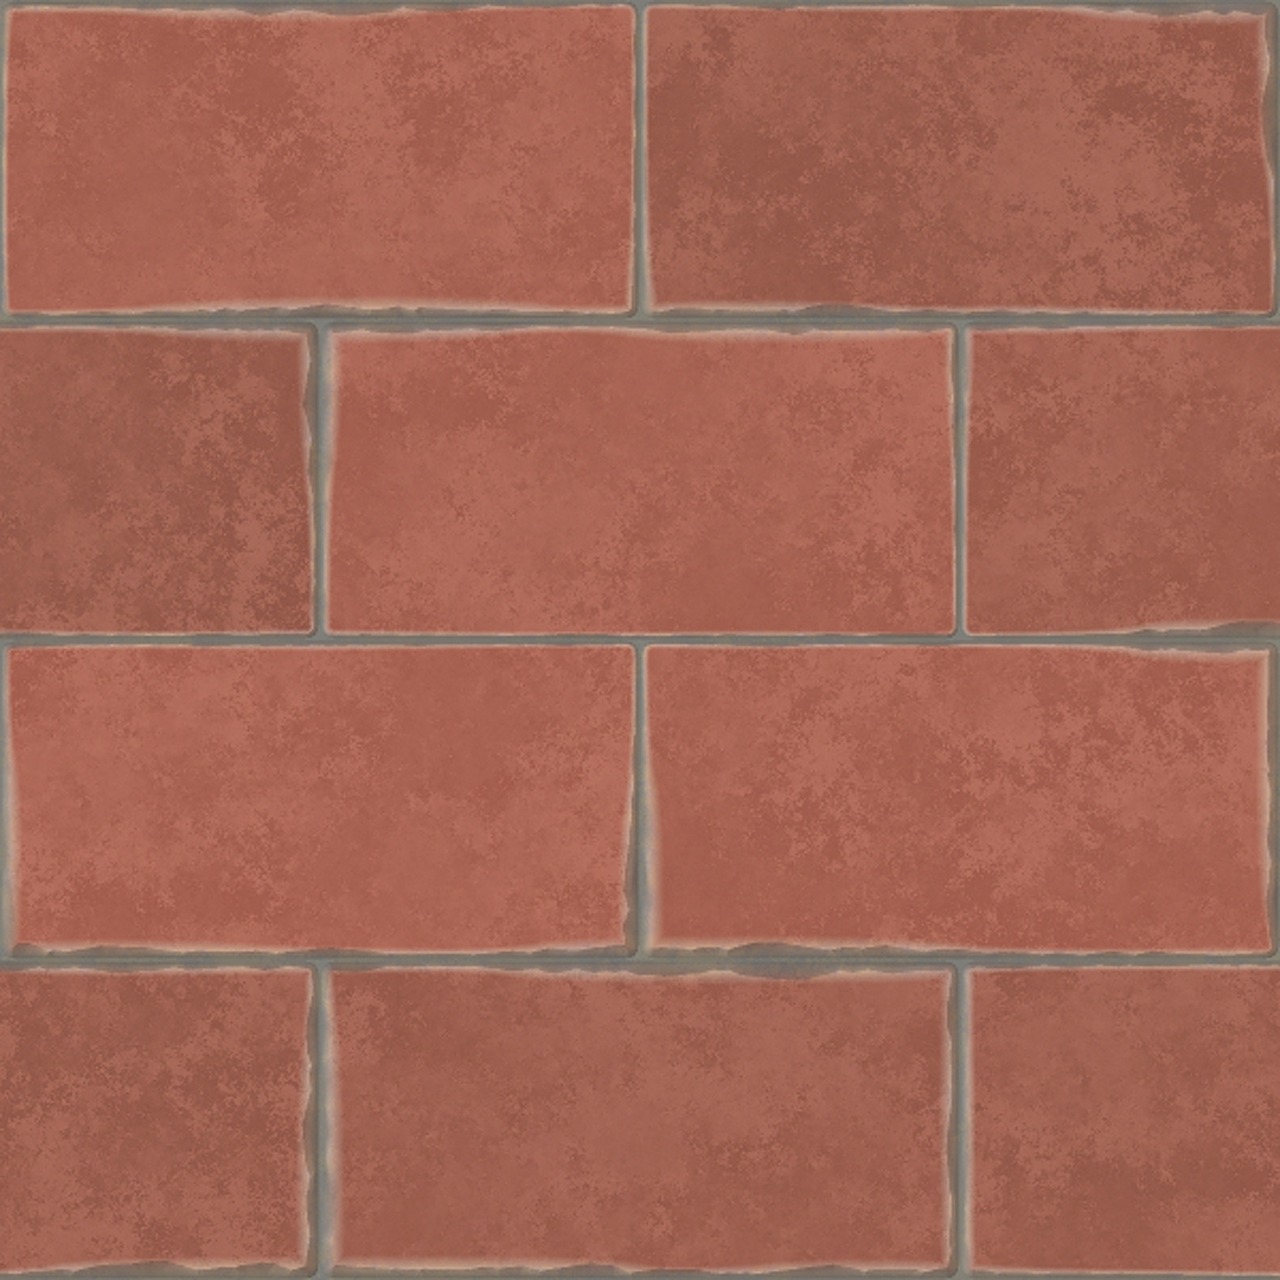 antique red bricks wall background free photo